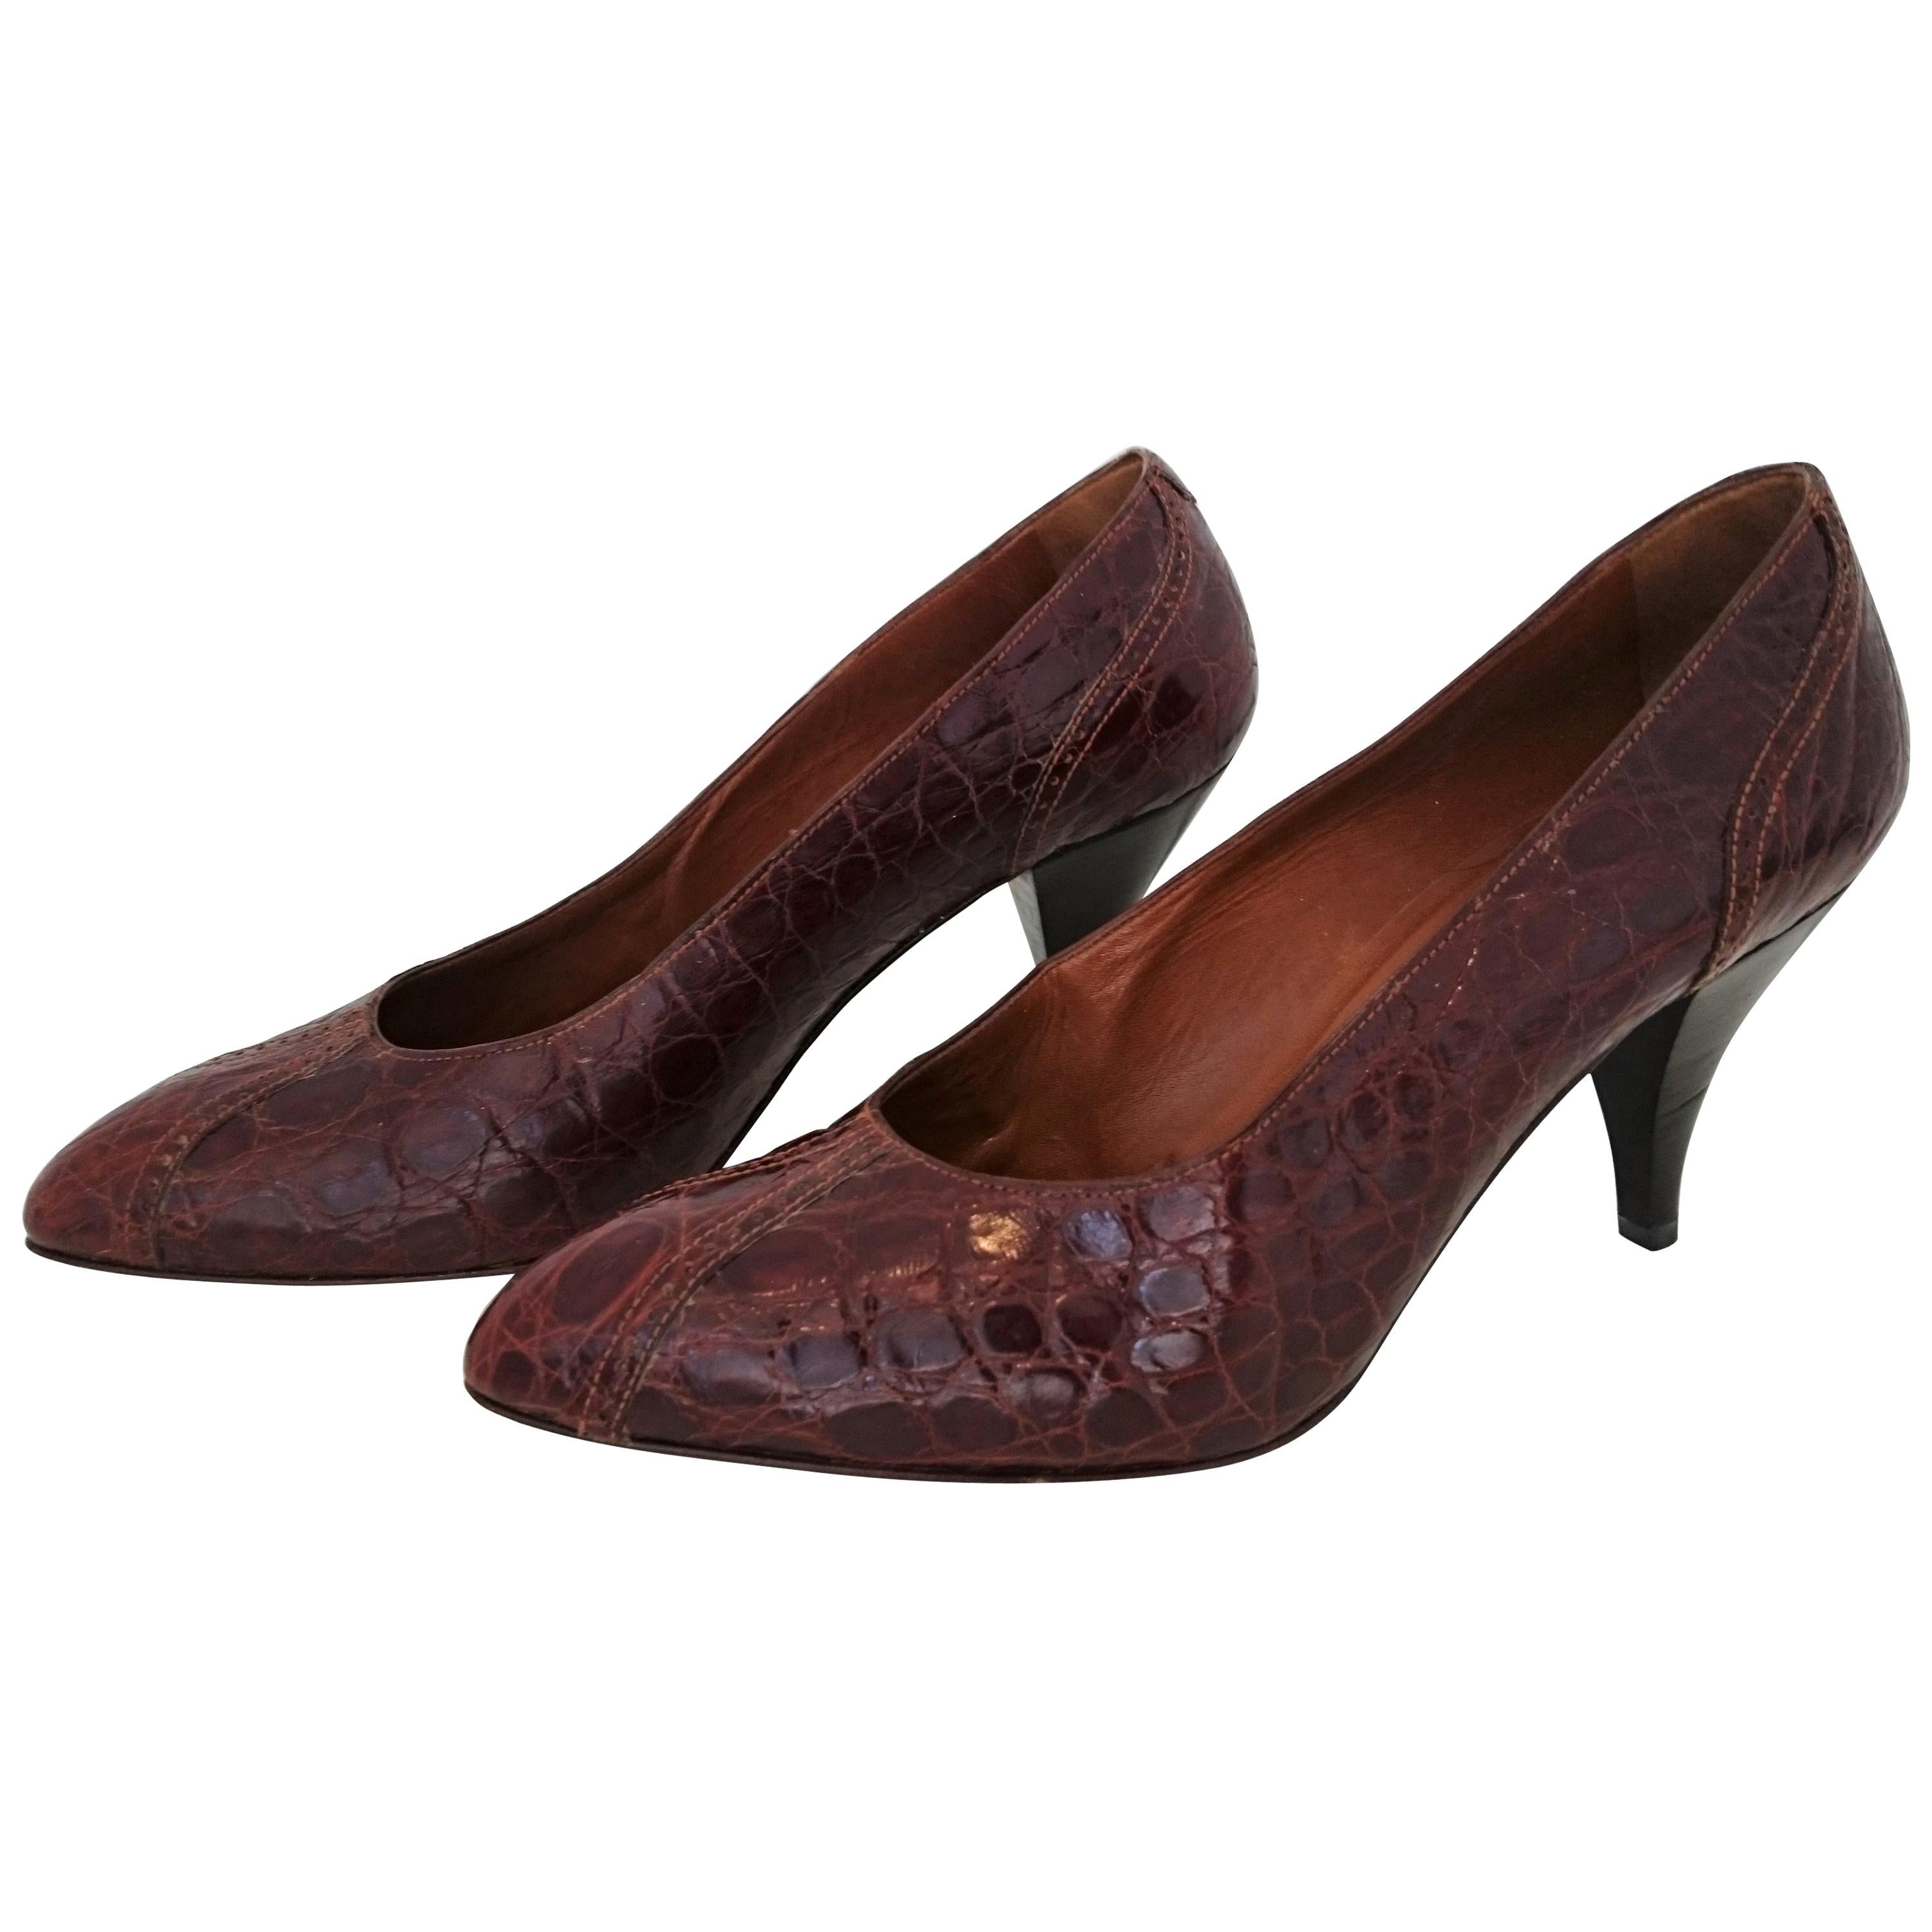 Prada Heels in Wild Crocodile Leather with Wood Sole. Size 39.5 For Sale